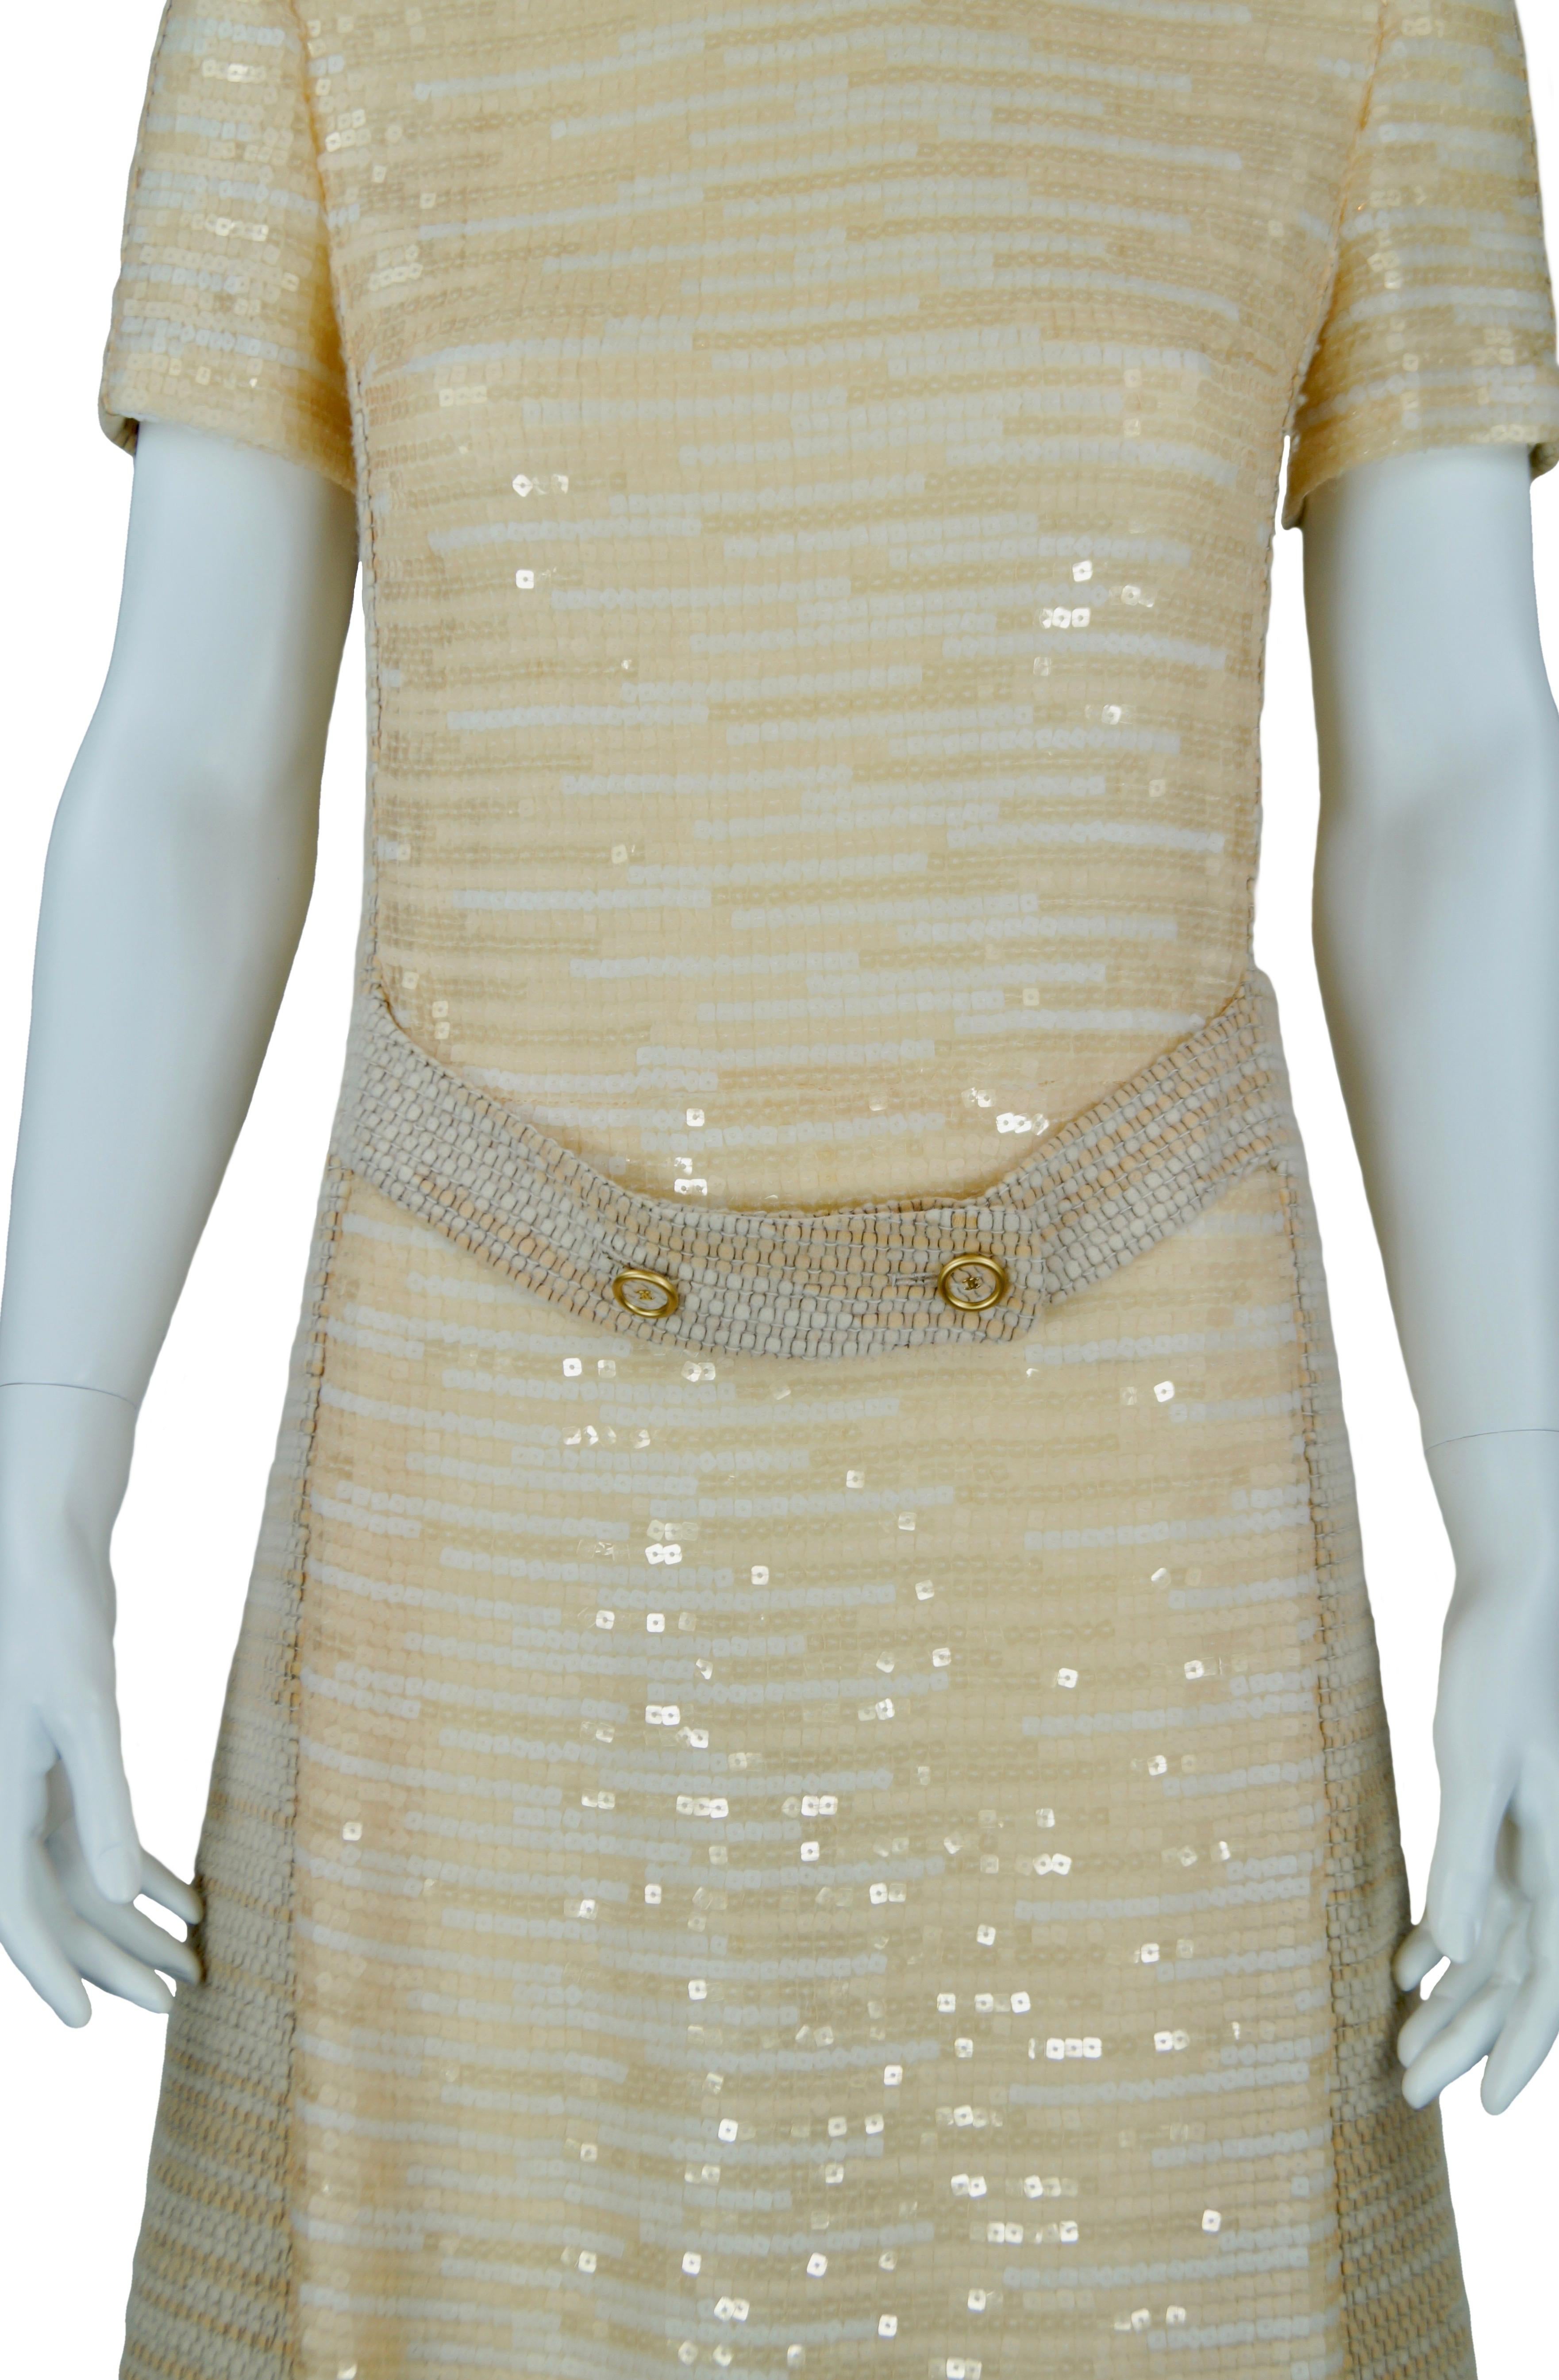 CHANEL dress F/W 2001 collection
A-line dress in beige melange tweed and champagne sequins; on the front  martingale belt with logo buttons; short sleeve; zip on the back.
Size Fr 40
Made in France
Measures:
Length cm. 98
Shoulders cm. 40
Bust cm.